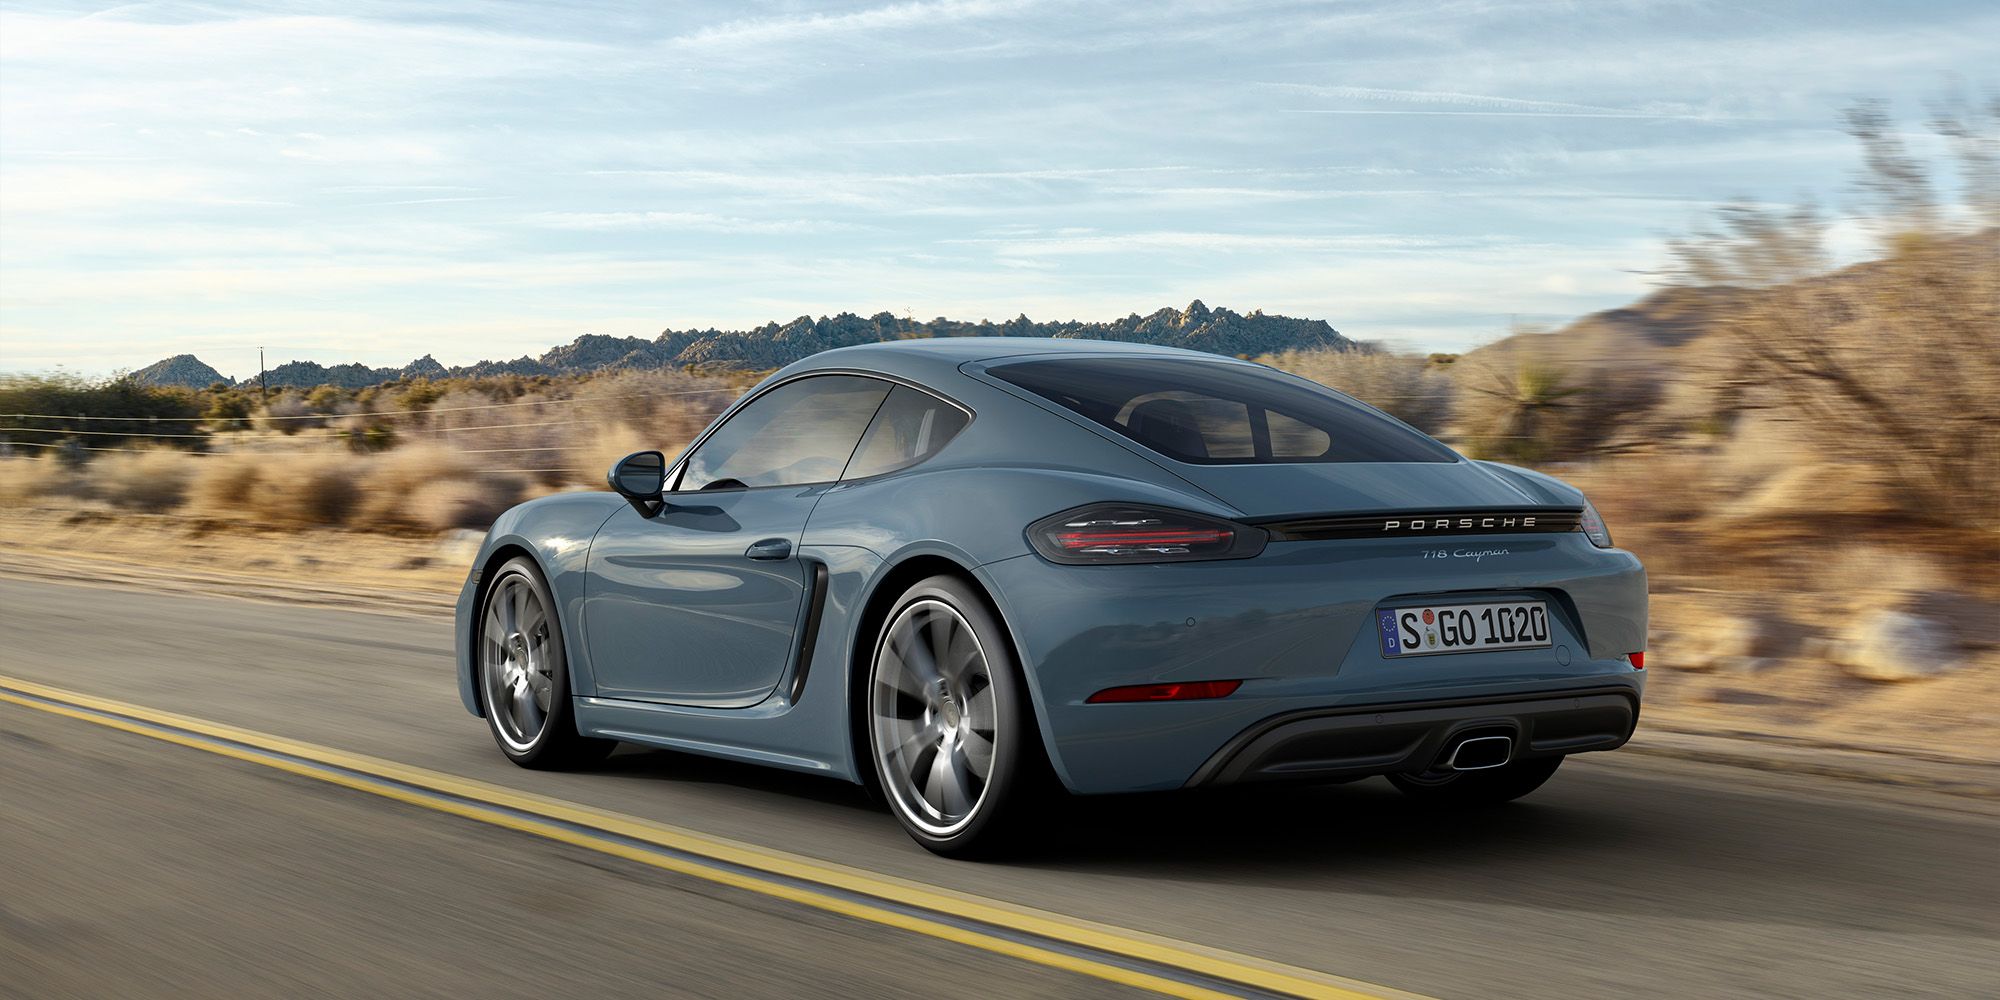 Rear 3/4 view of the 718 Cayman